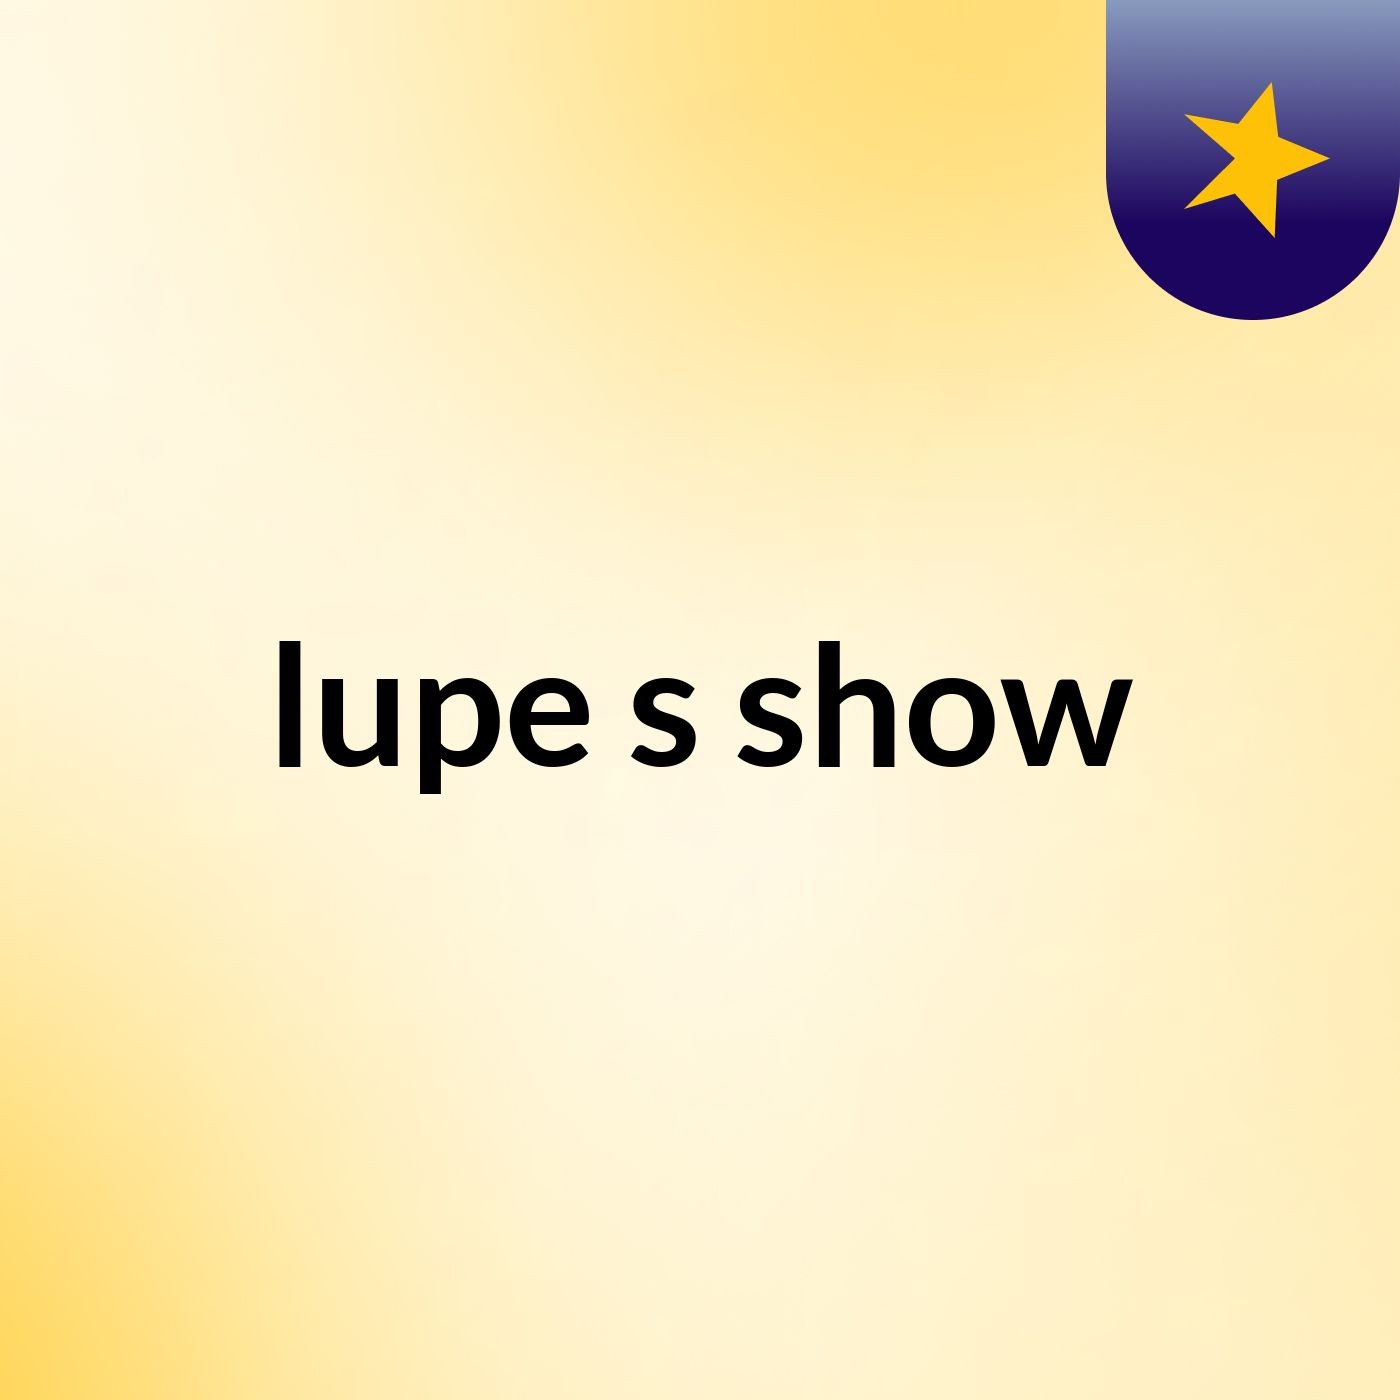 lupe's show